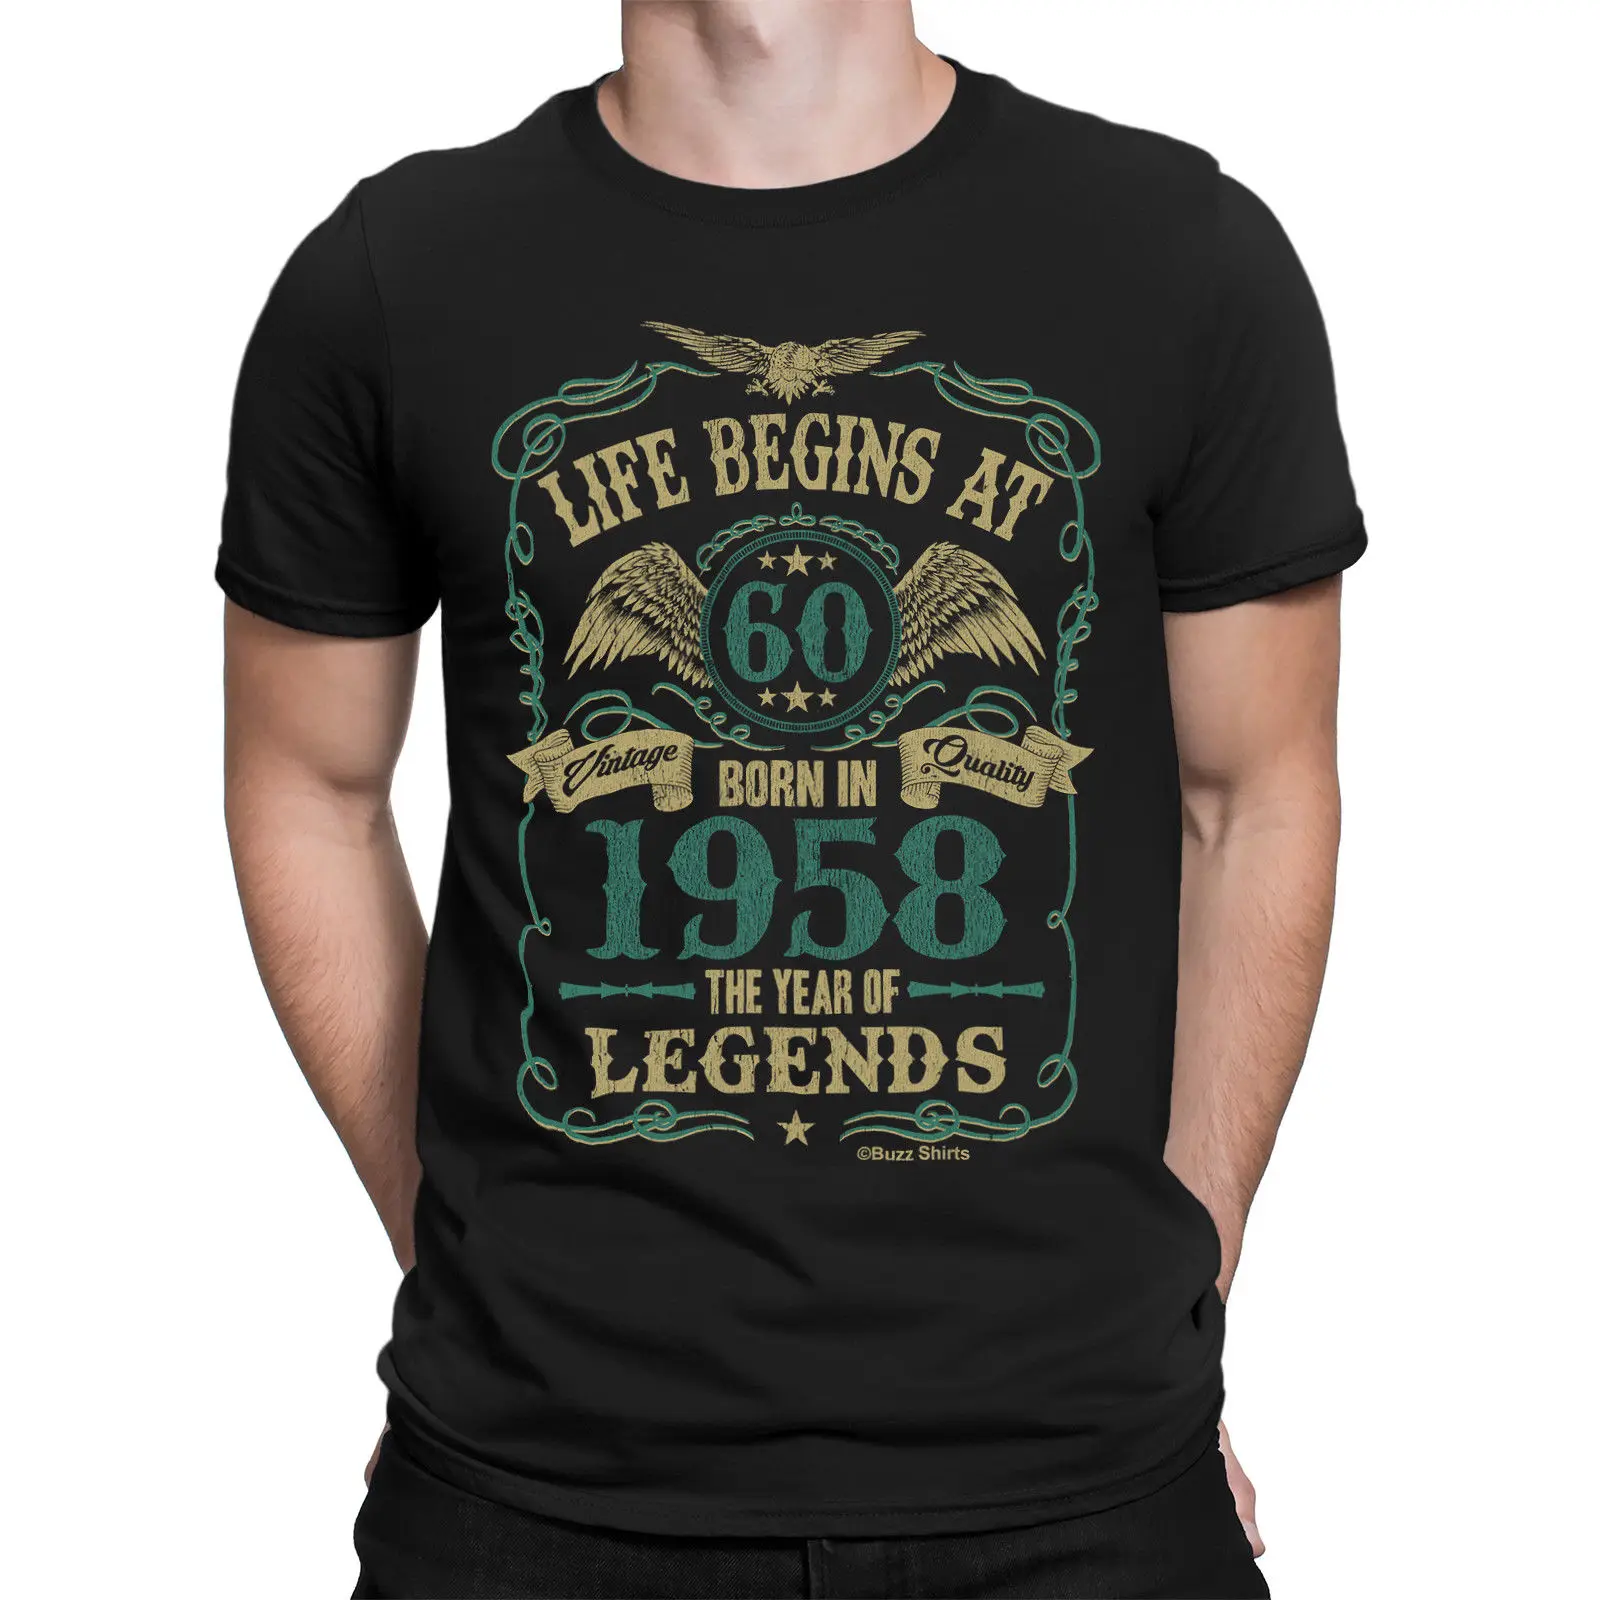 2019 Fashion Summer Style Life Begins At 60 Mens T-Shirt BORN In 1958 Year of Legends 60th Birthday Gift Tee shirt